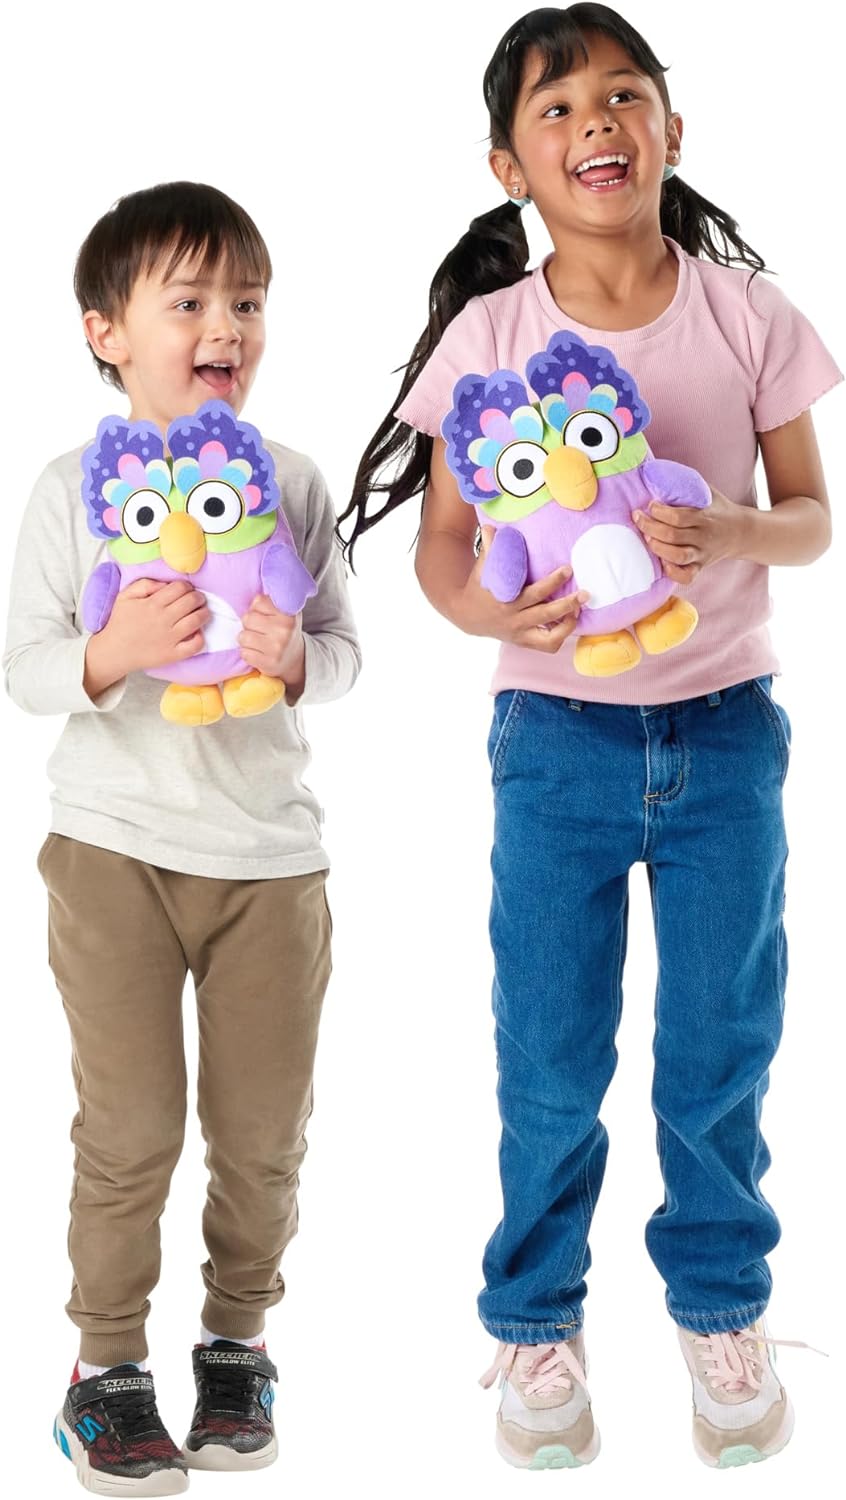 Bluey Chattermax 10" Plush Toy Press The Belly to Hear Sound Effects and Record Your Voice | Amazon Exclusive